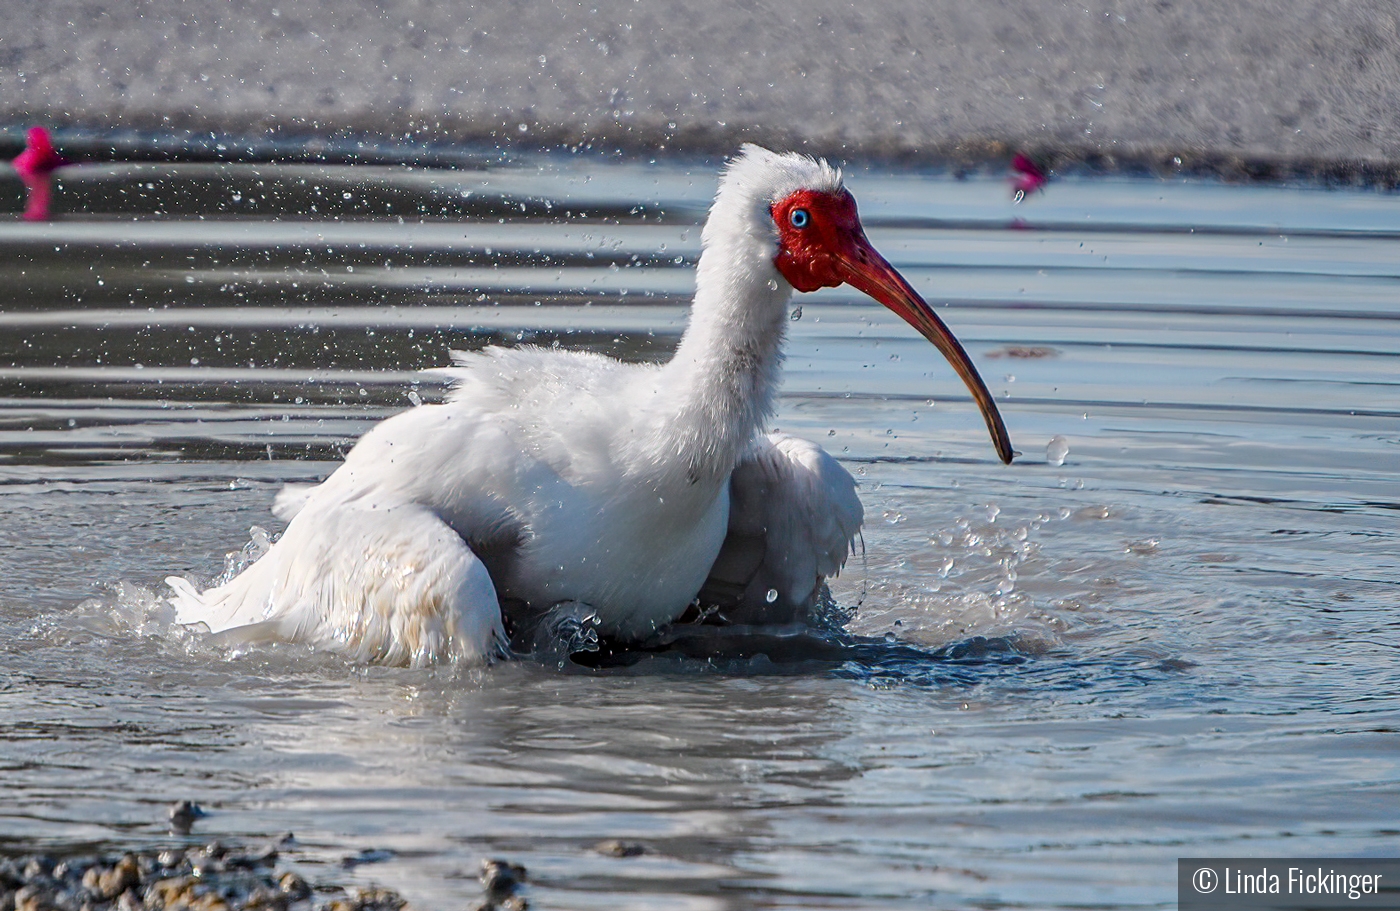 The Ibis and the Mud Puddle by Linda Fickinger